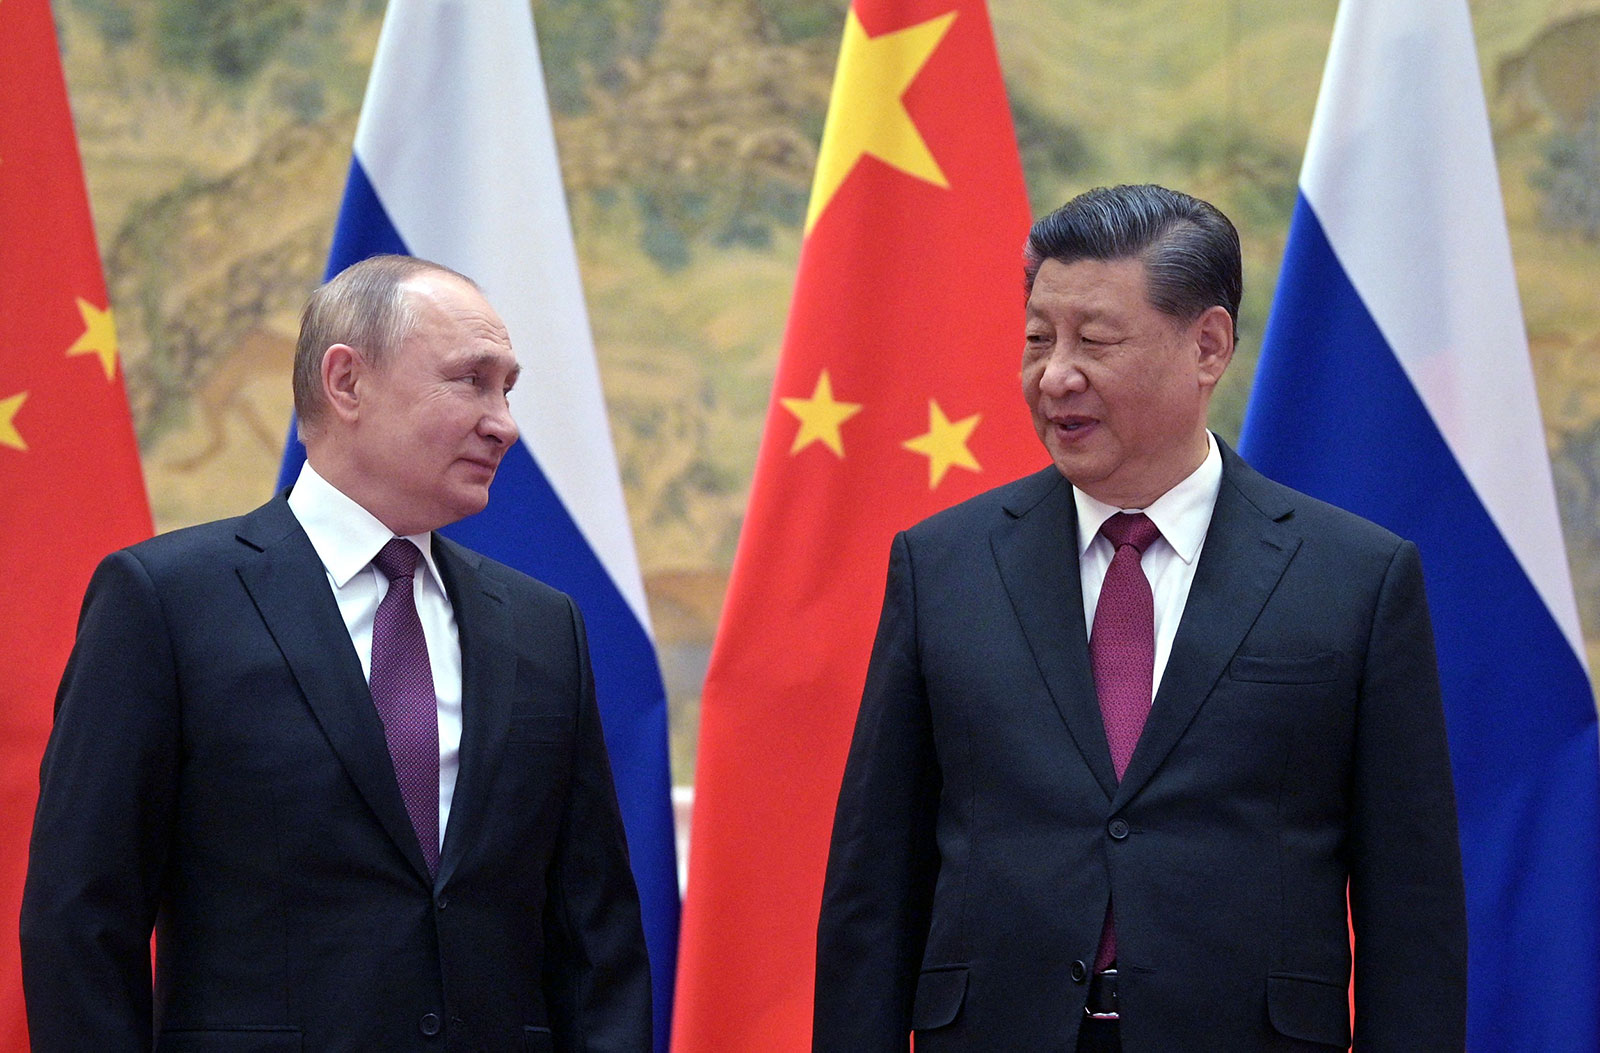 Russian President Vladimir Putin and China's President Xi Jinping pose for a photo during a meeting in Beijing on February 4.